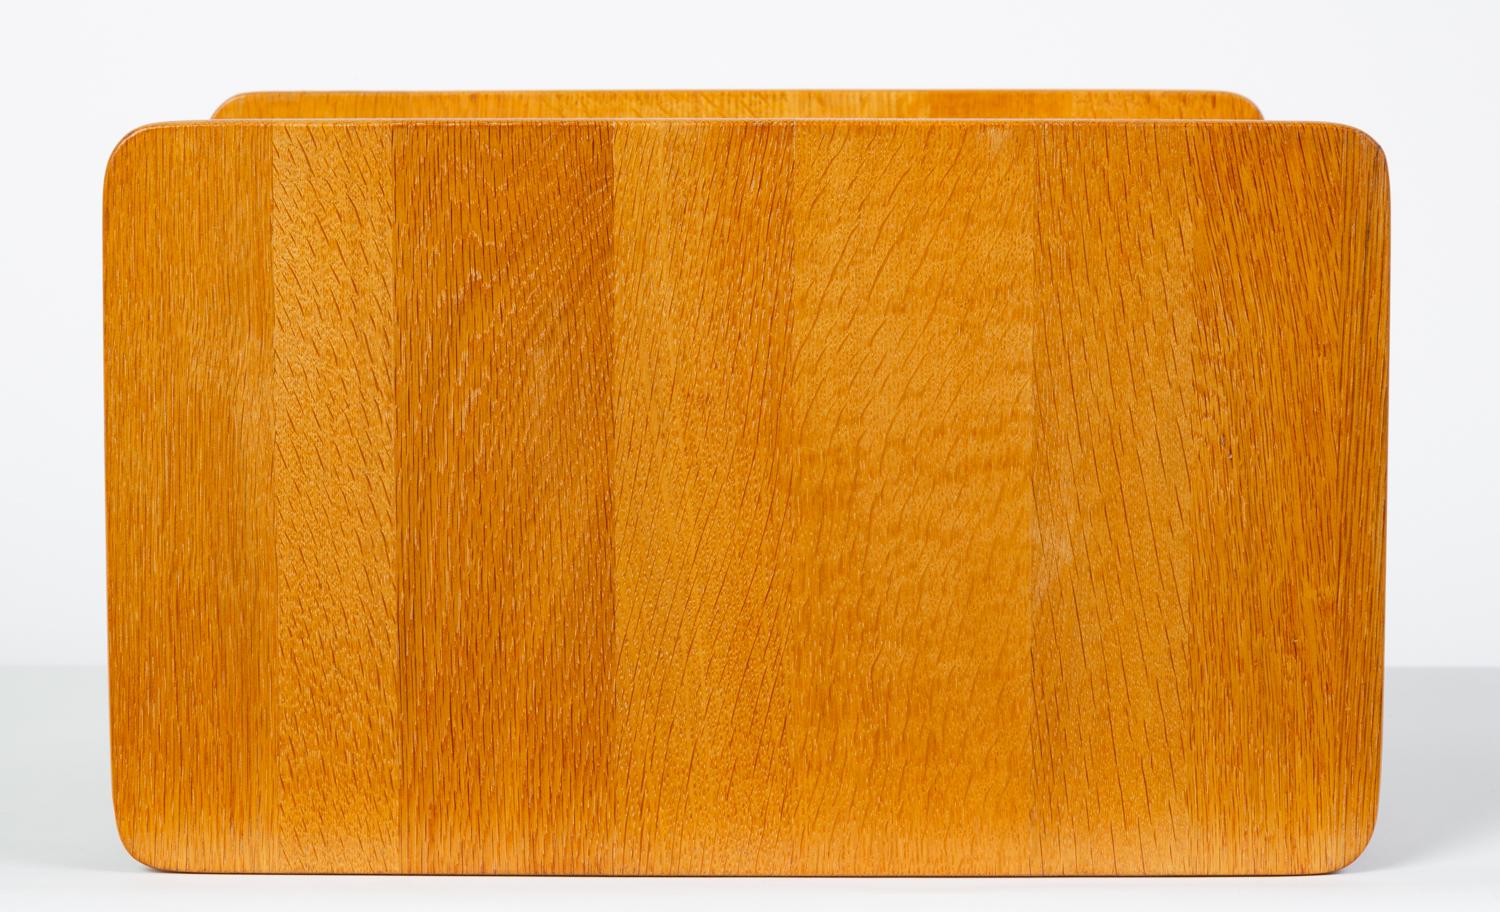 Swedish Oak Desk Organizer with Painted Drawers by Børge Mogensen for Karl Andersson